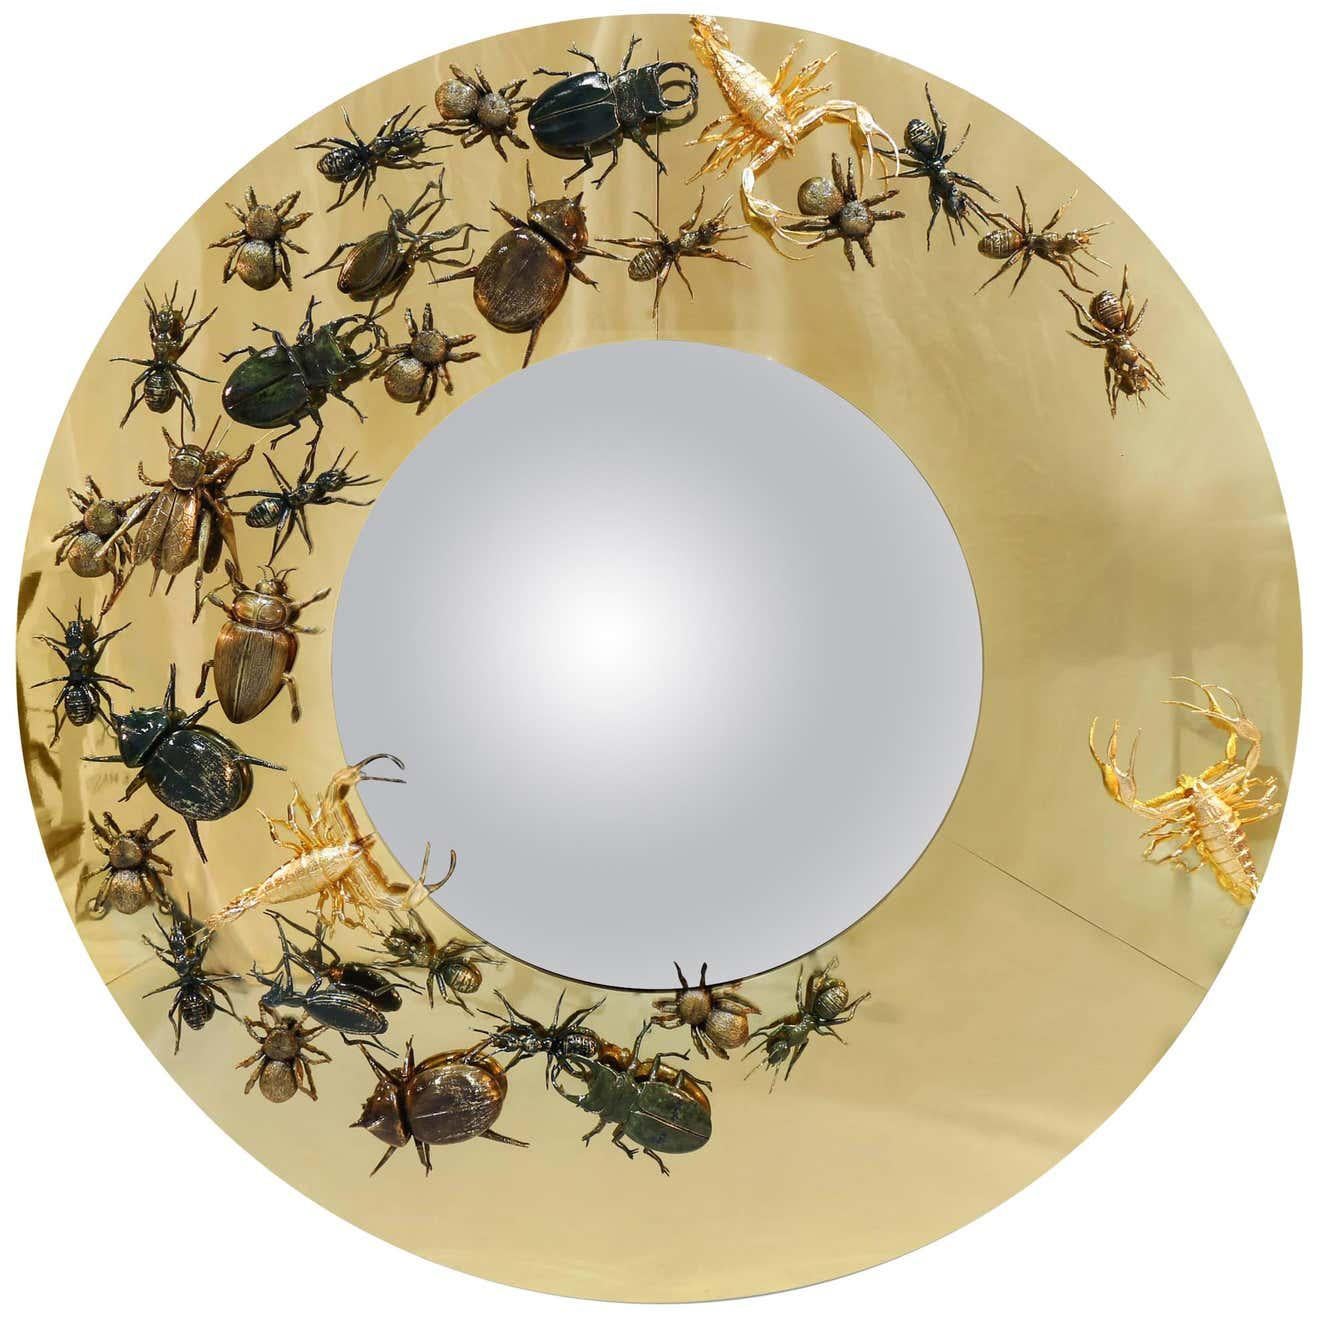 Mirror The Insects im Angebot